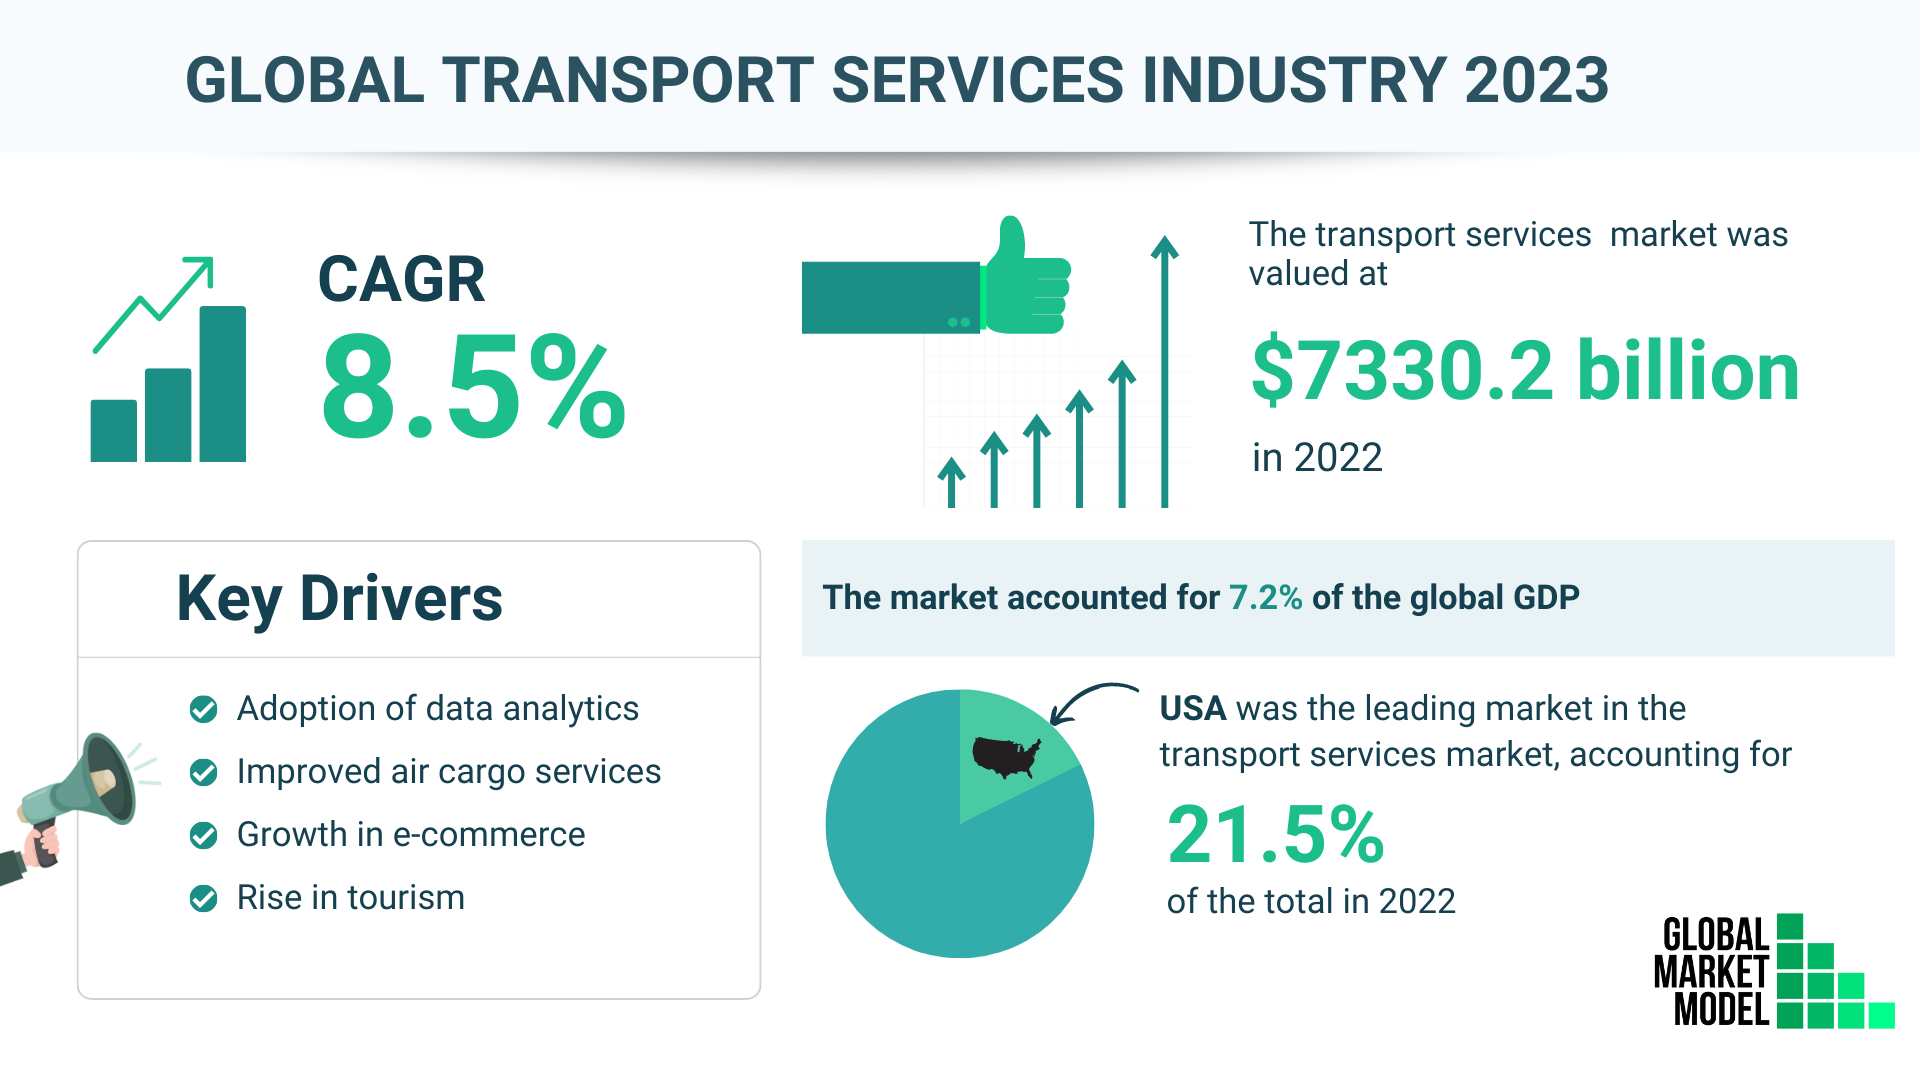 Global Transport Services Industry 2023